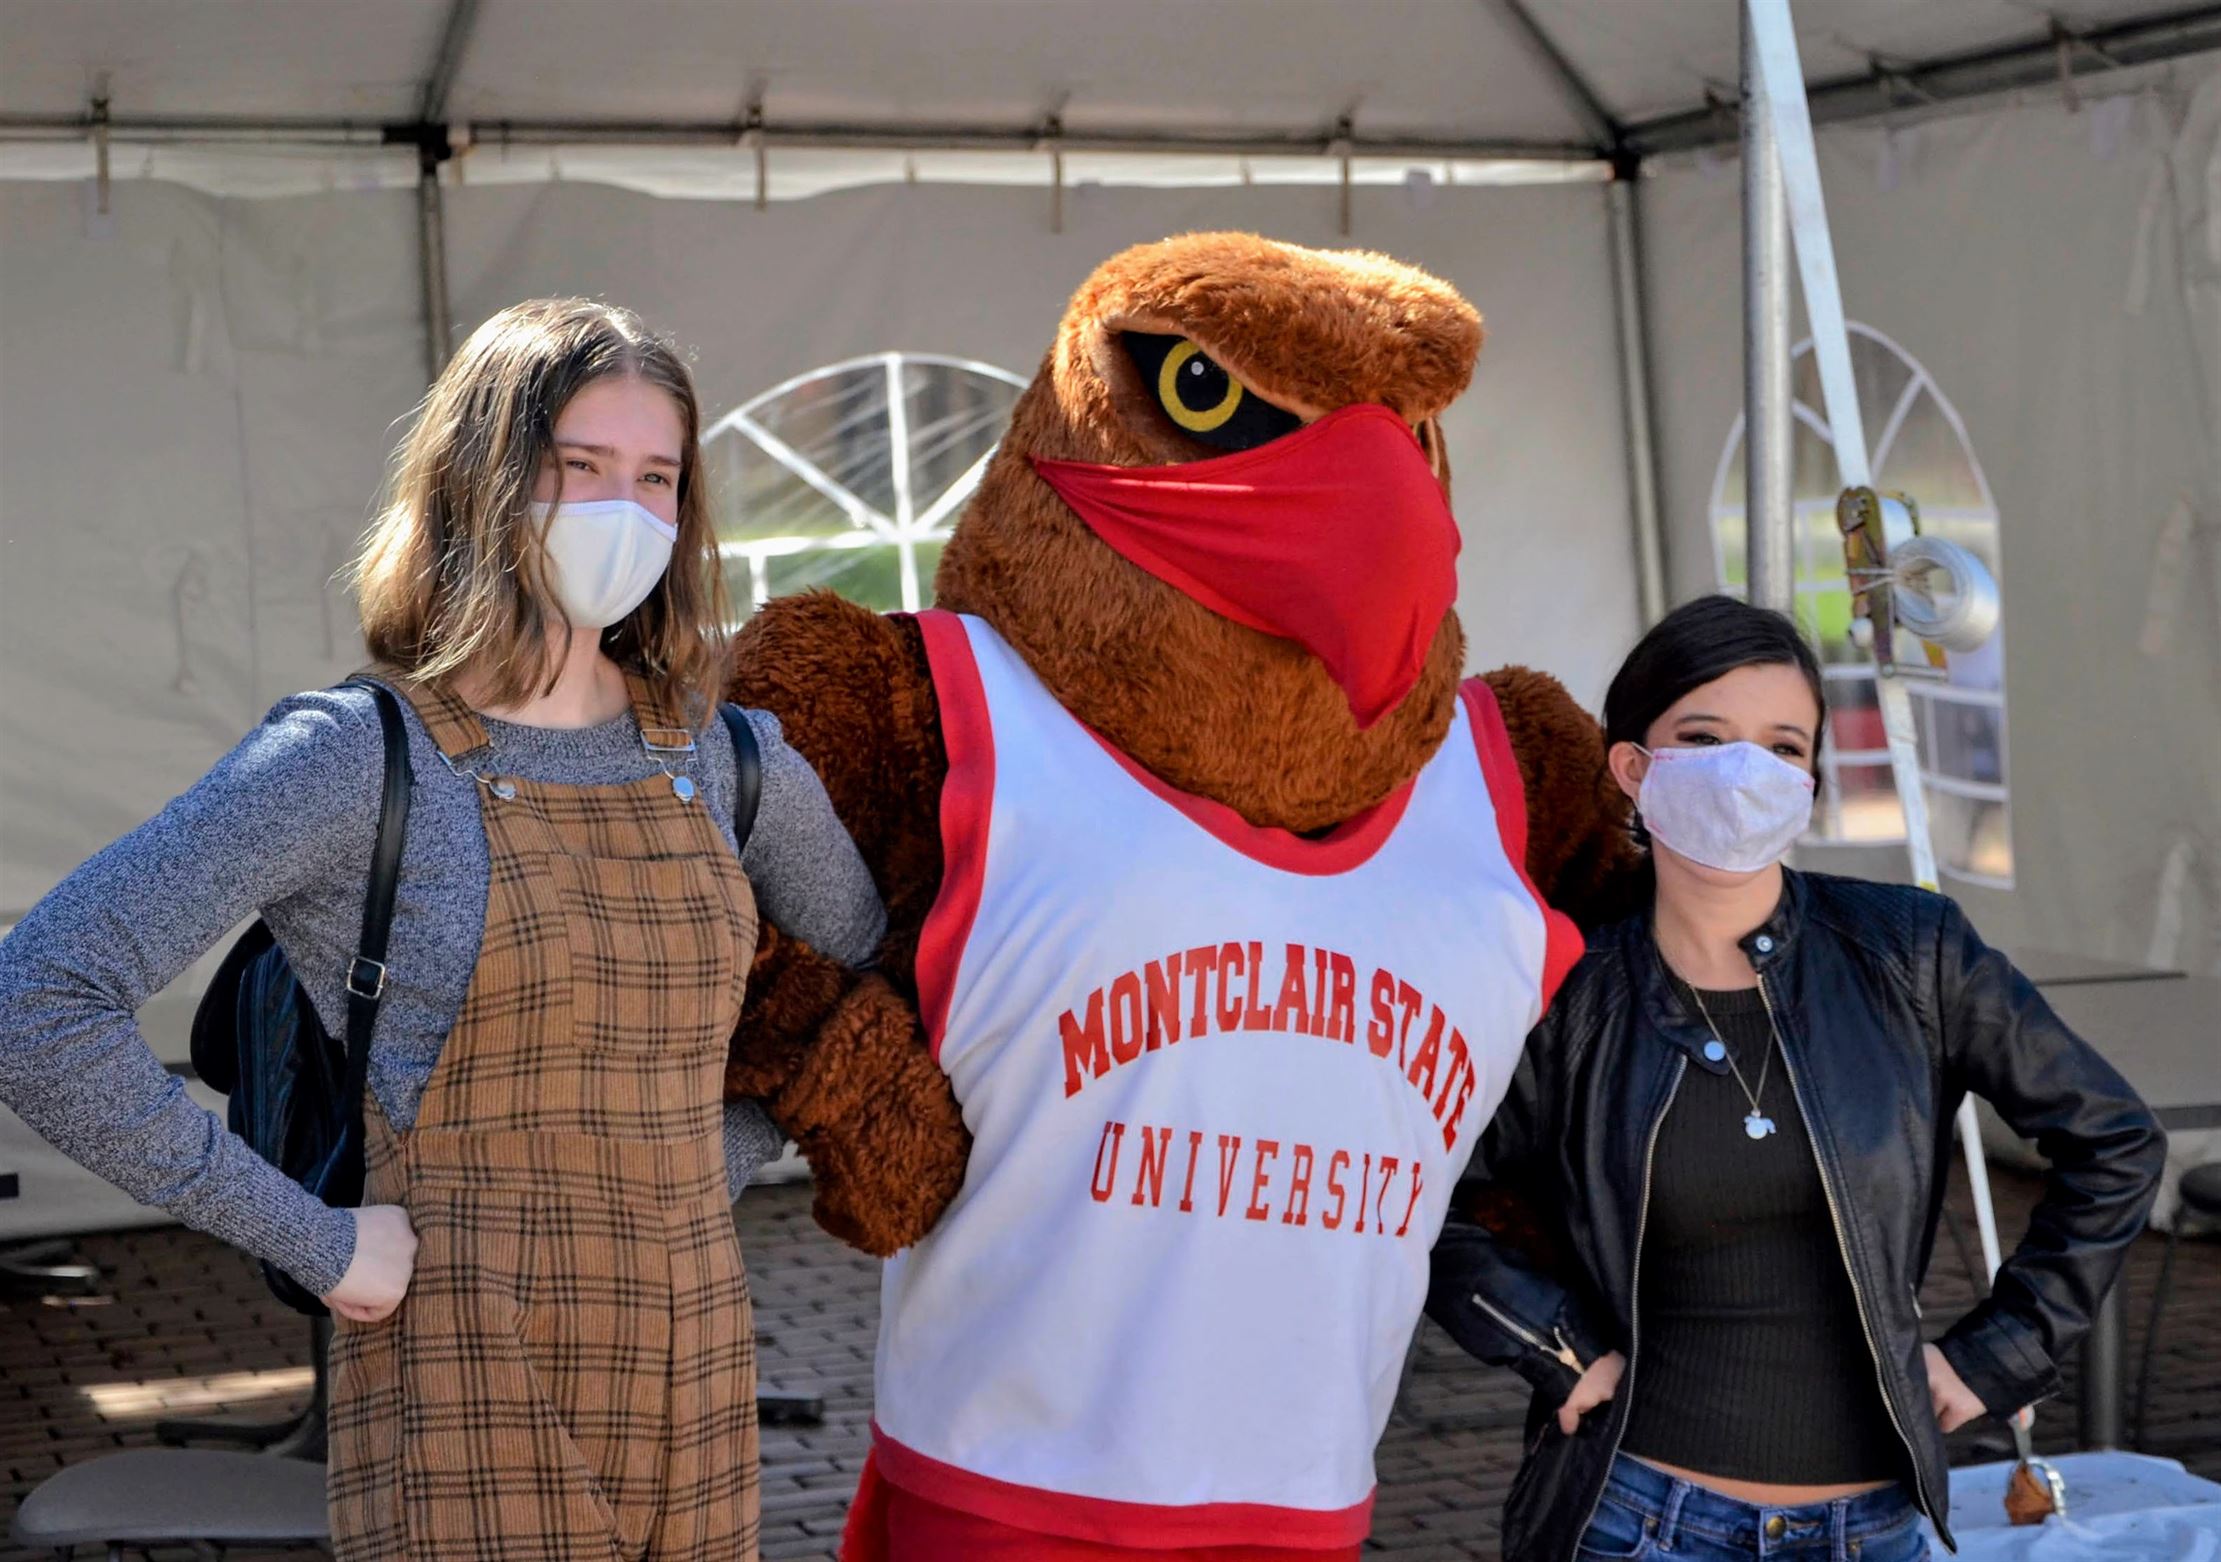 Montclair State students Rebecca Kobik and Danielle Tufariello strike a pose with Rocky during University Day festivities, on Oct. 14, 2020. Photo courtesy of John LaRosa